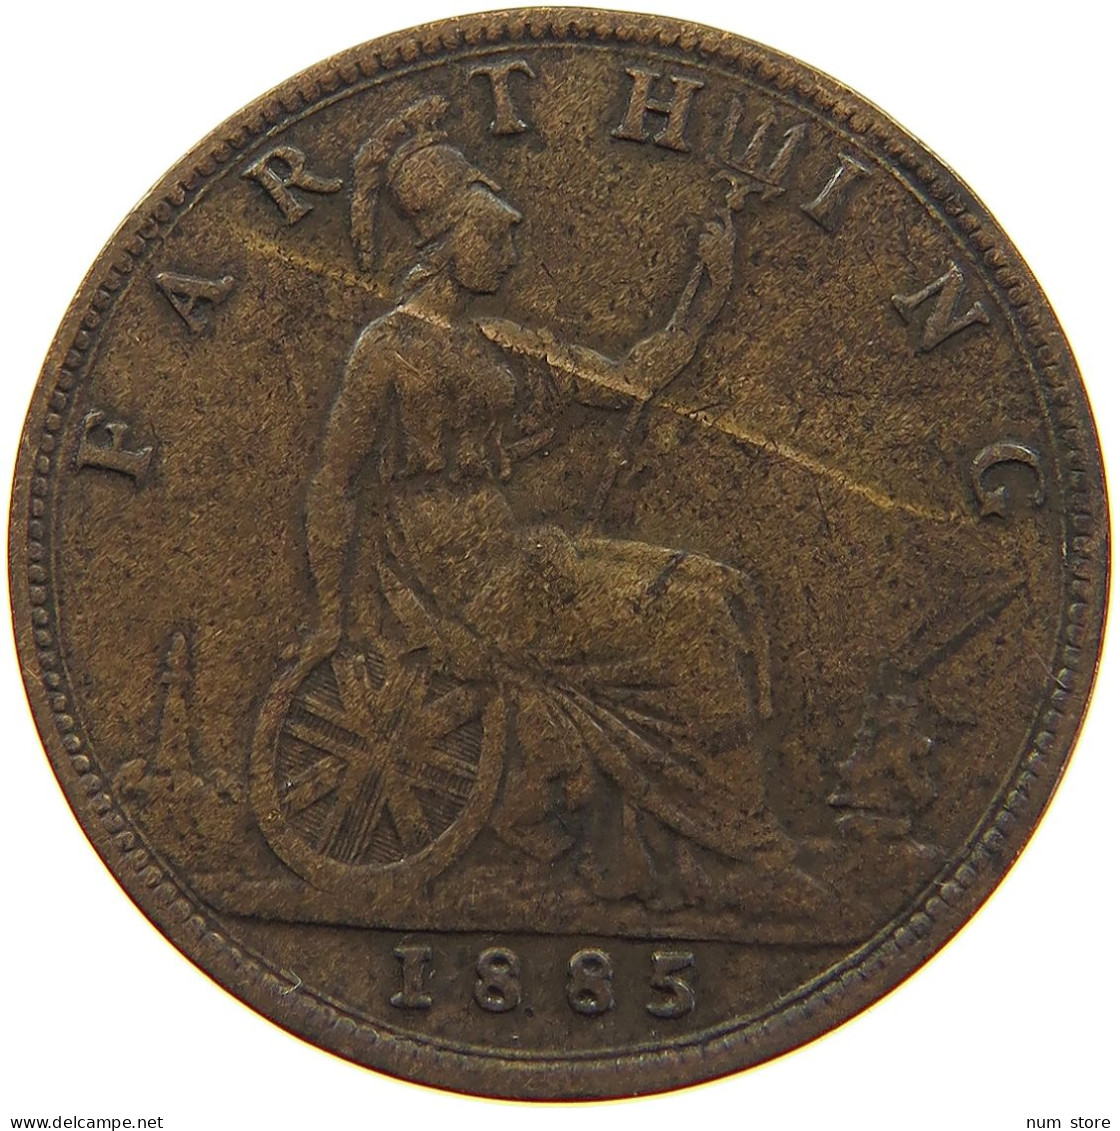 GREAT BRITAIN FARTHING 1885 Victoria 1837-1901 #a011 0783 - B. 1 Farthing